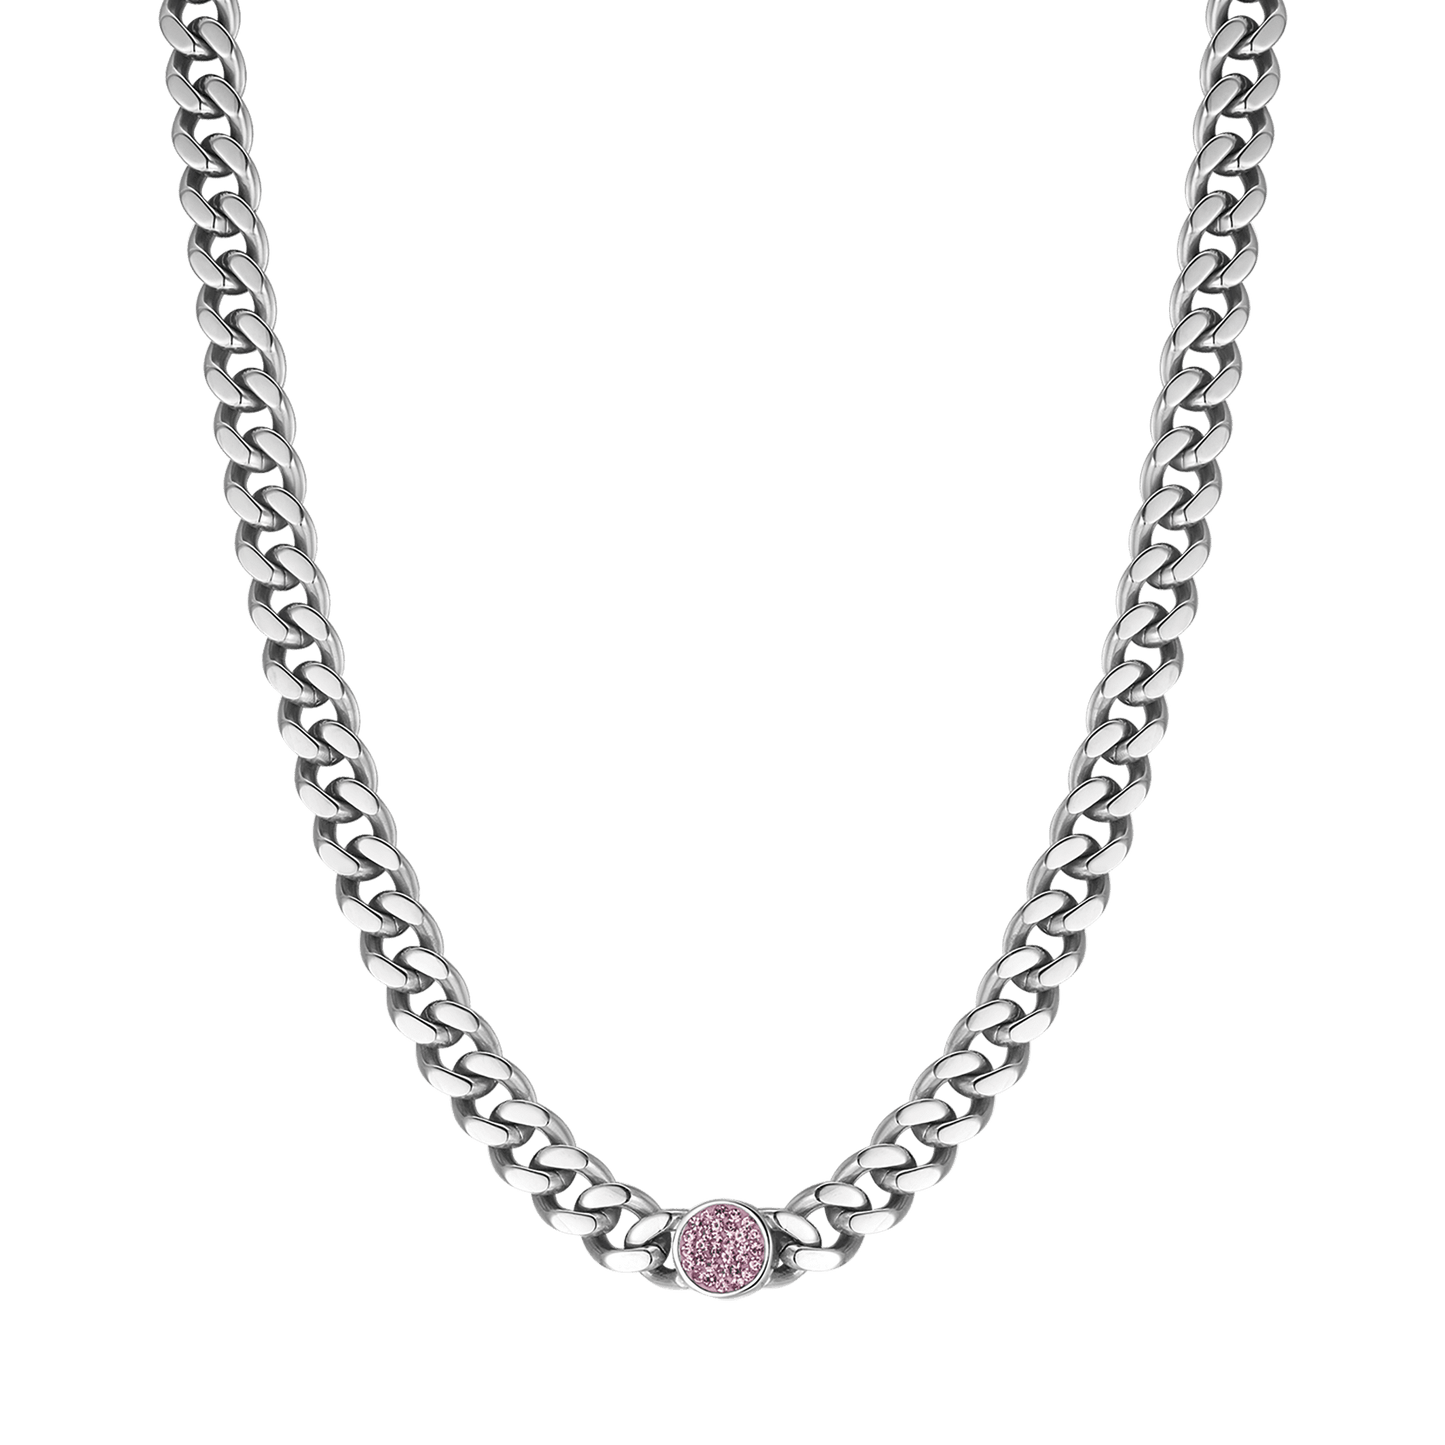 WOMEN'S STEEL NECKLACE WITH PINK CRYSTALS